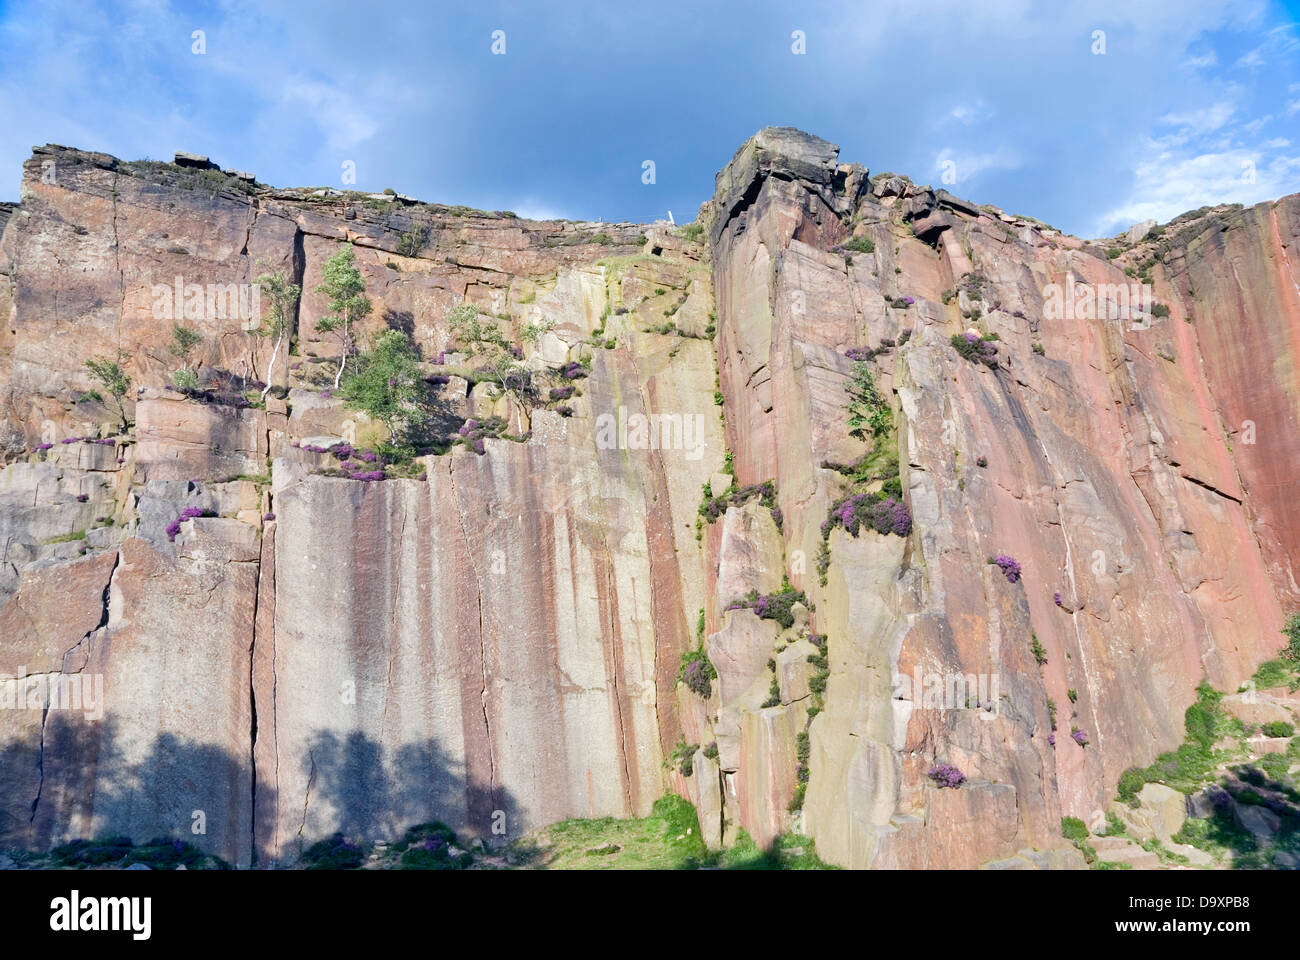 Looking up at Millstone Edge, a sheer cliff face jutting out of the Peak District landscape, Derbyshire, UK Stock Photo